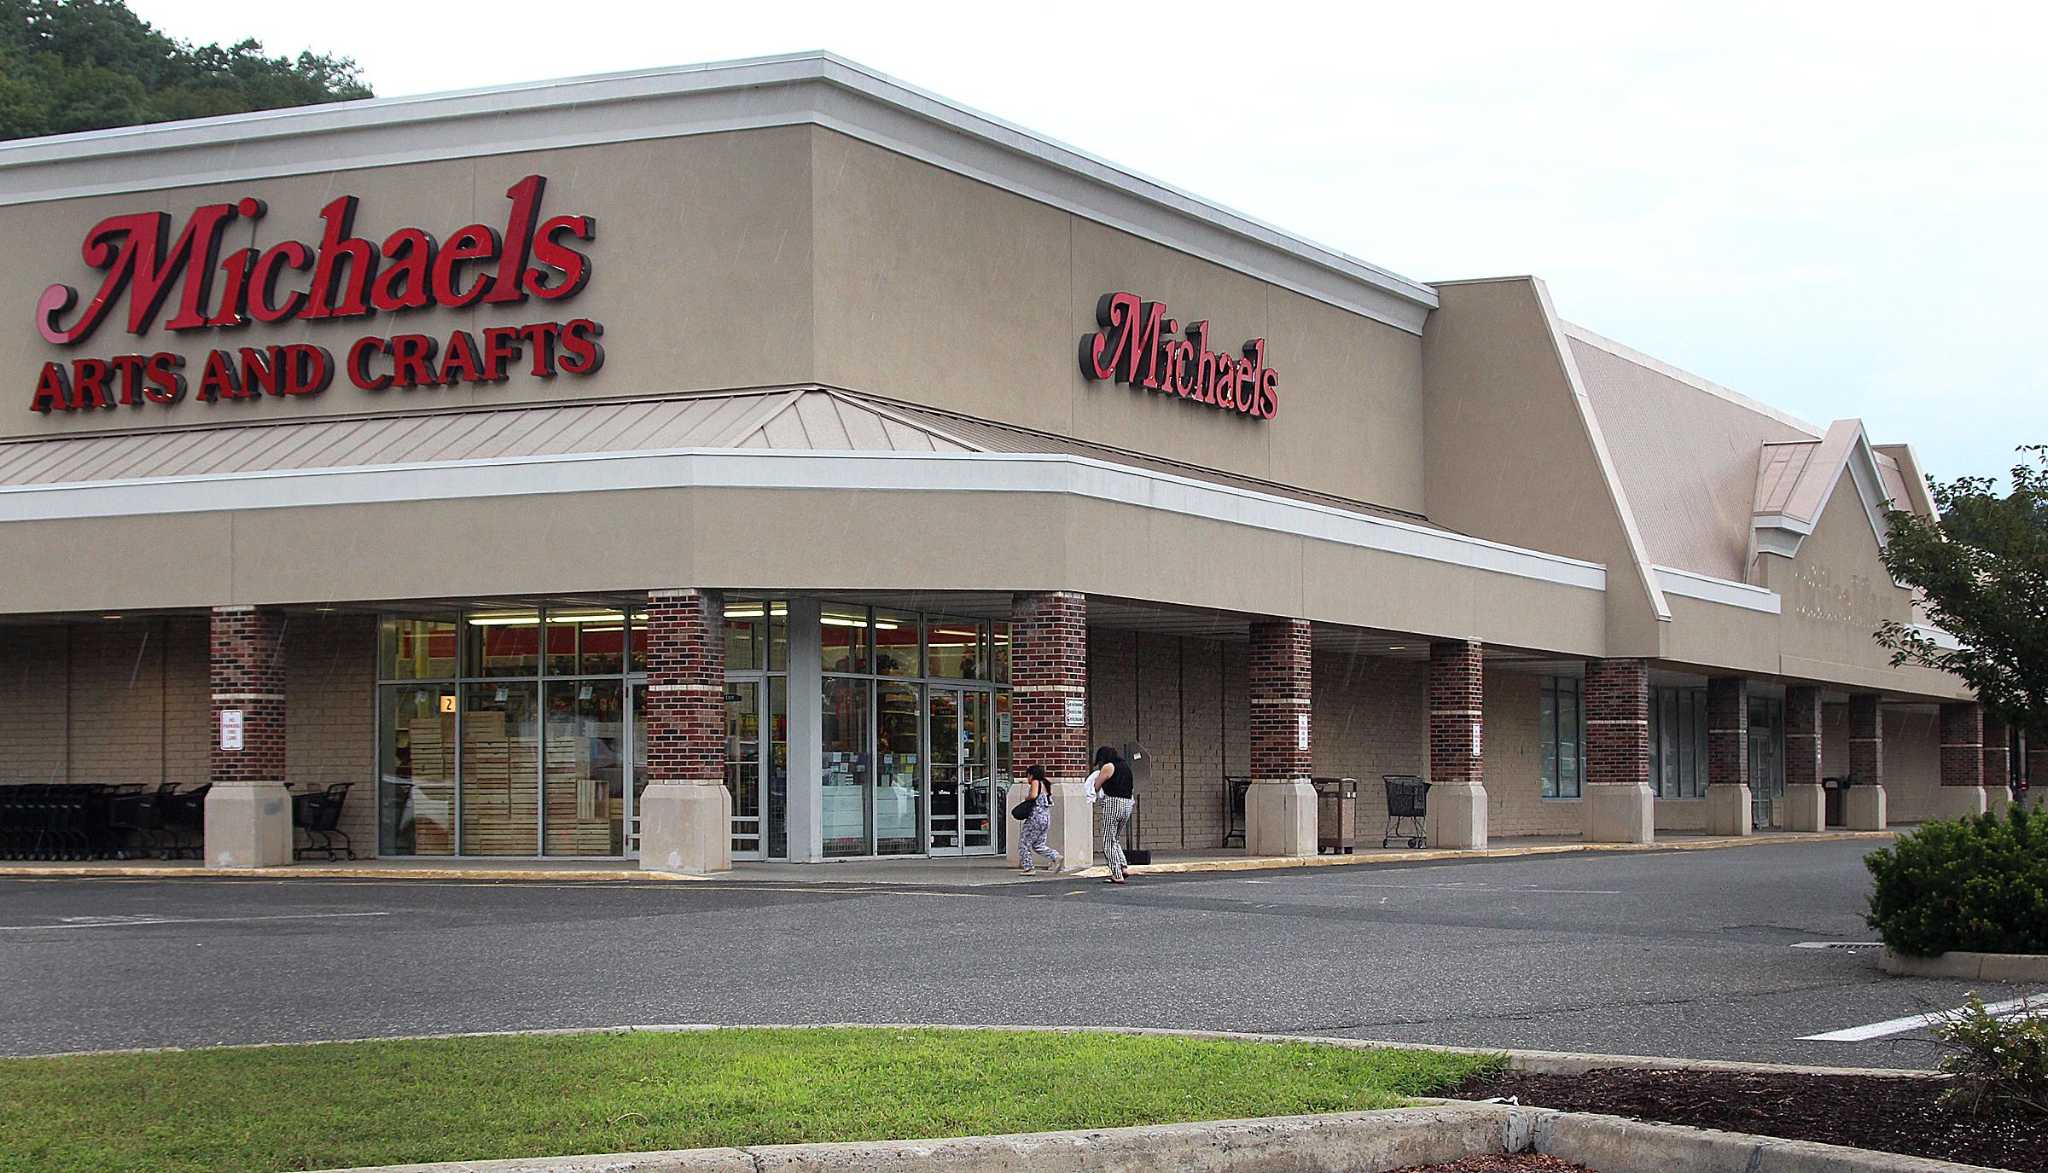 Michaels - Arts and Crafts Store in McKinney